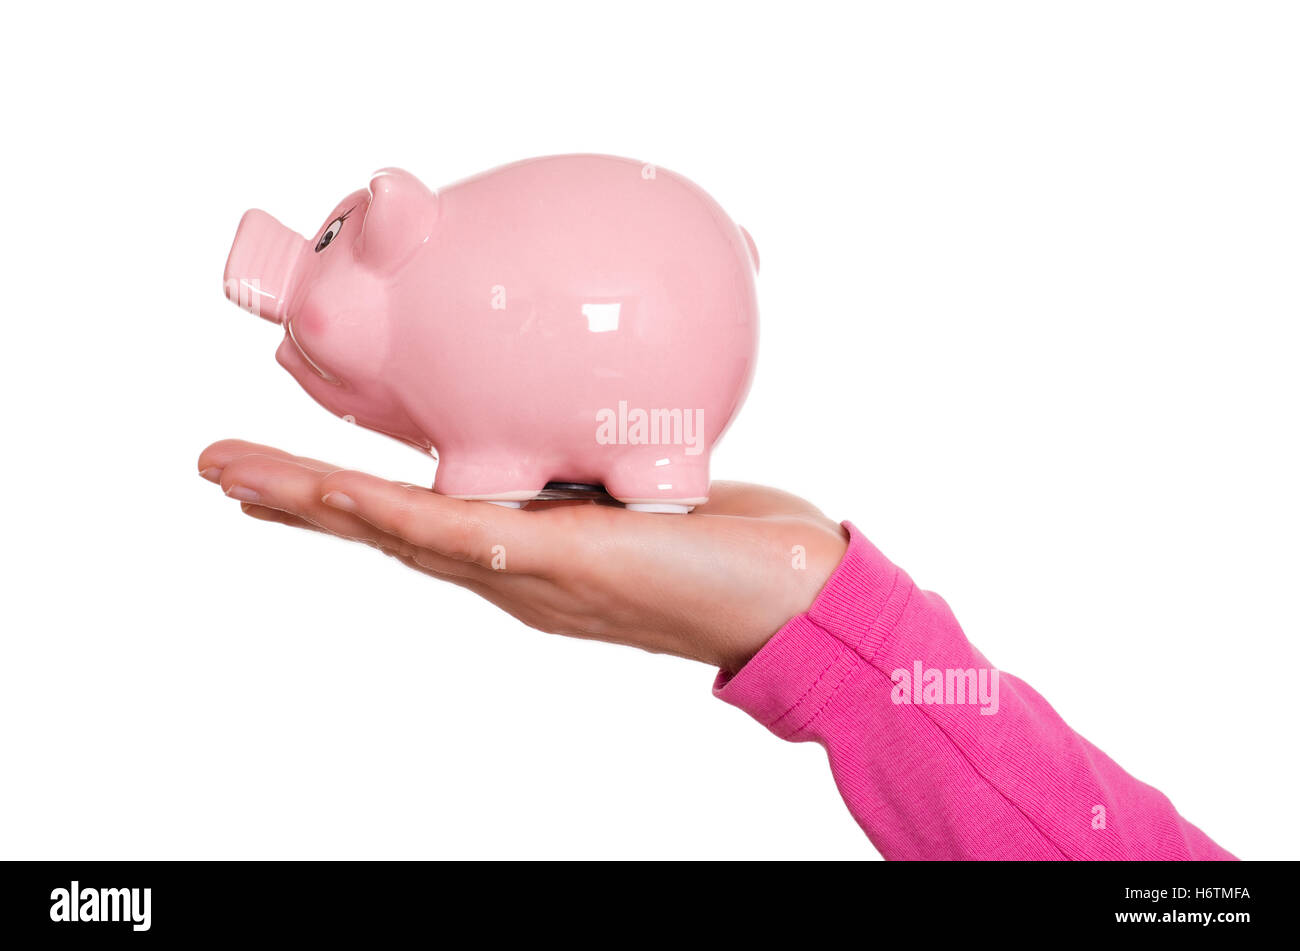 funny pink pig on a hand Stock Photo